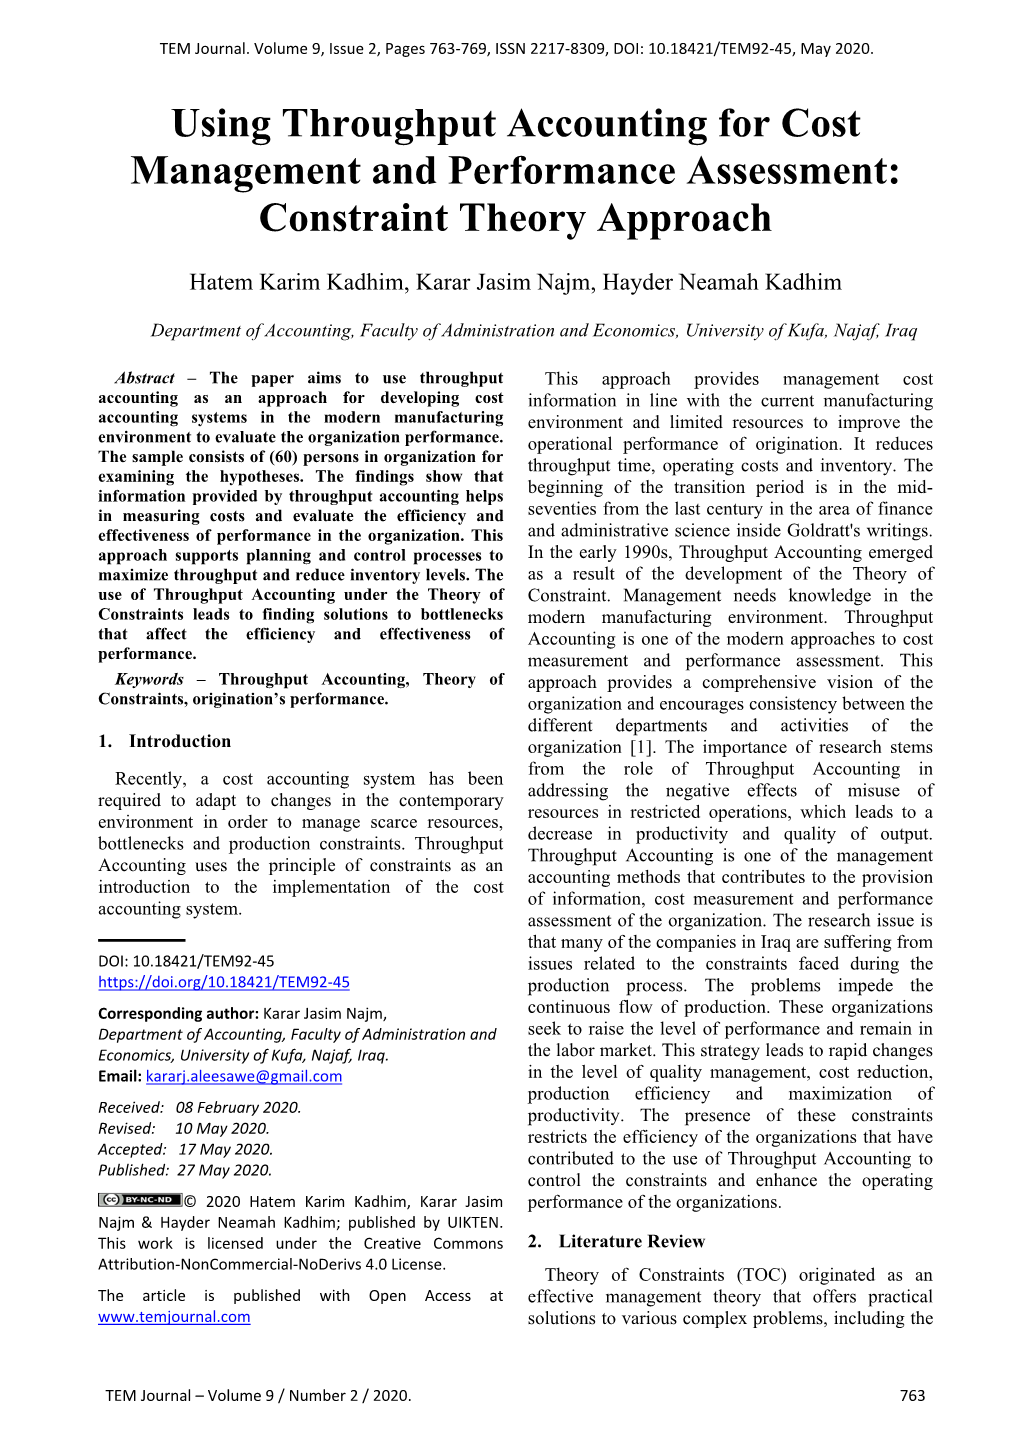 Using Throughput Accounting for Cost Management and Performance Assessment: Constraint Theory Approach